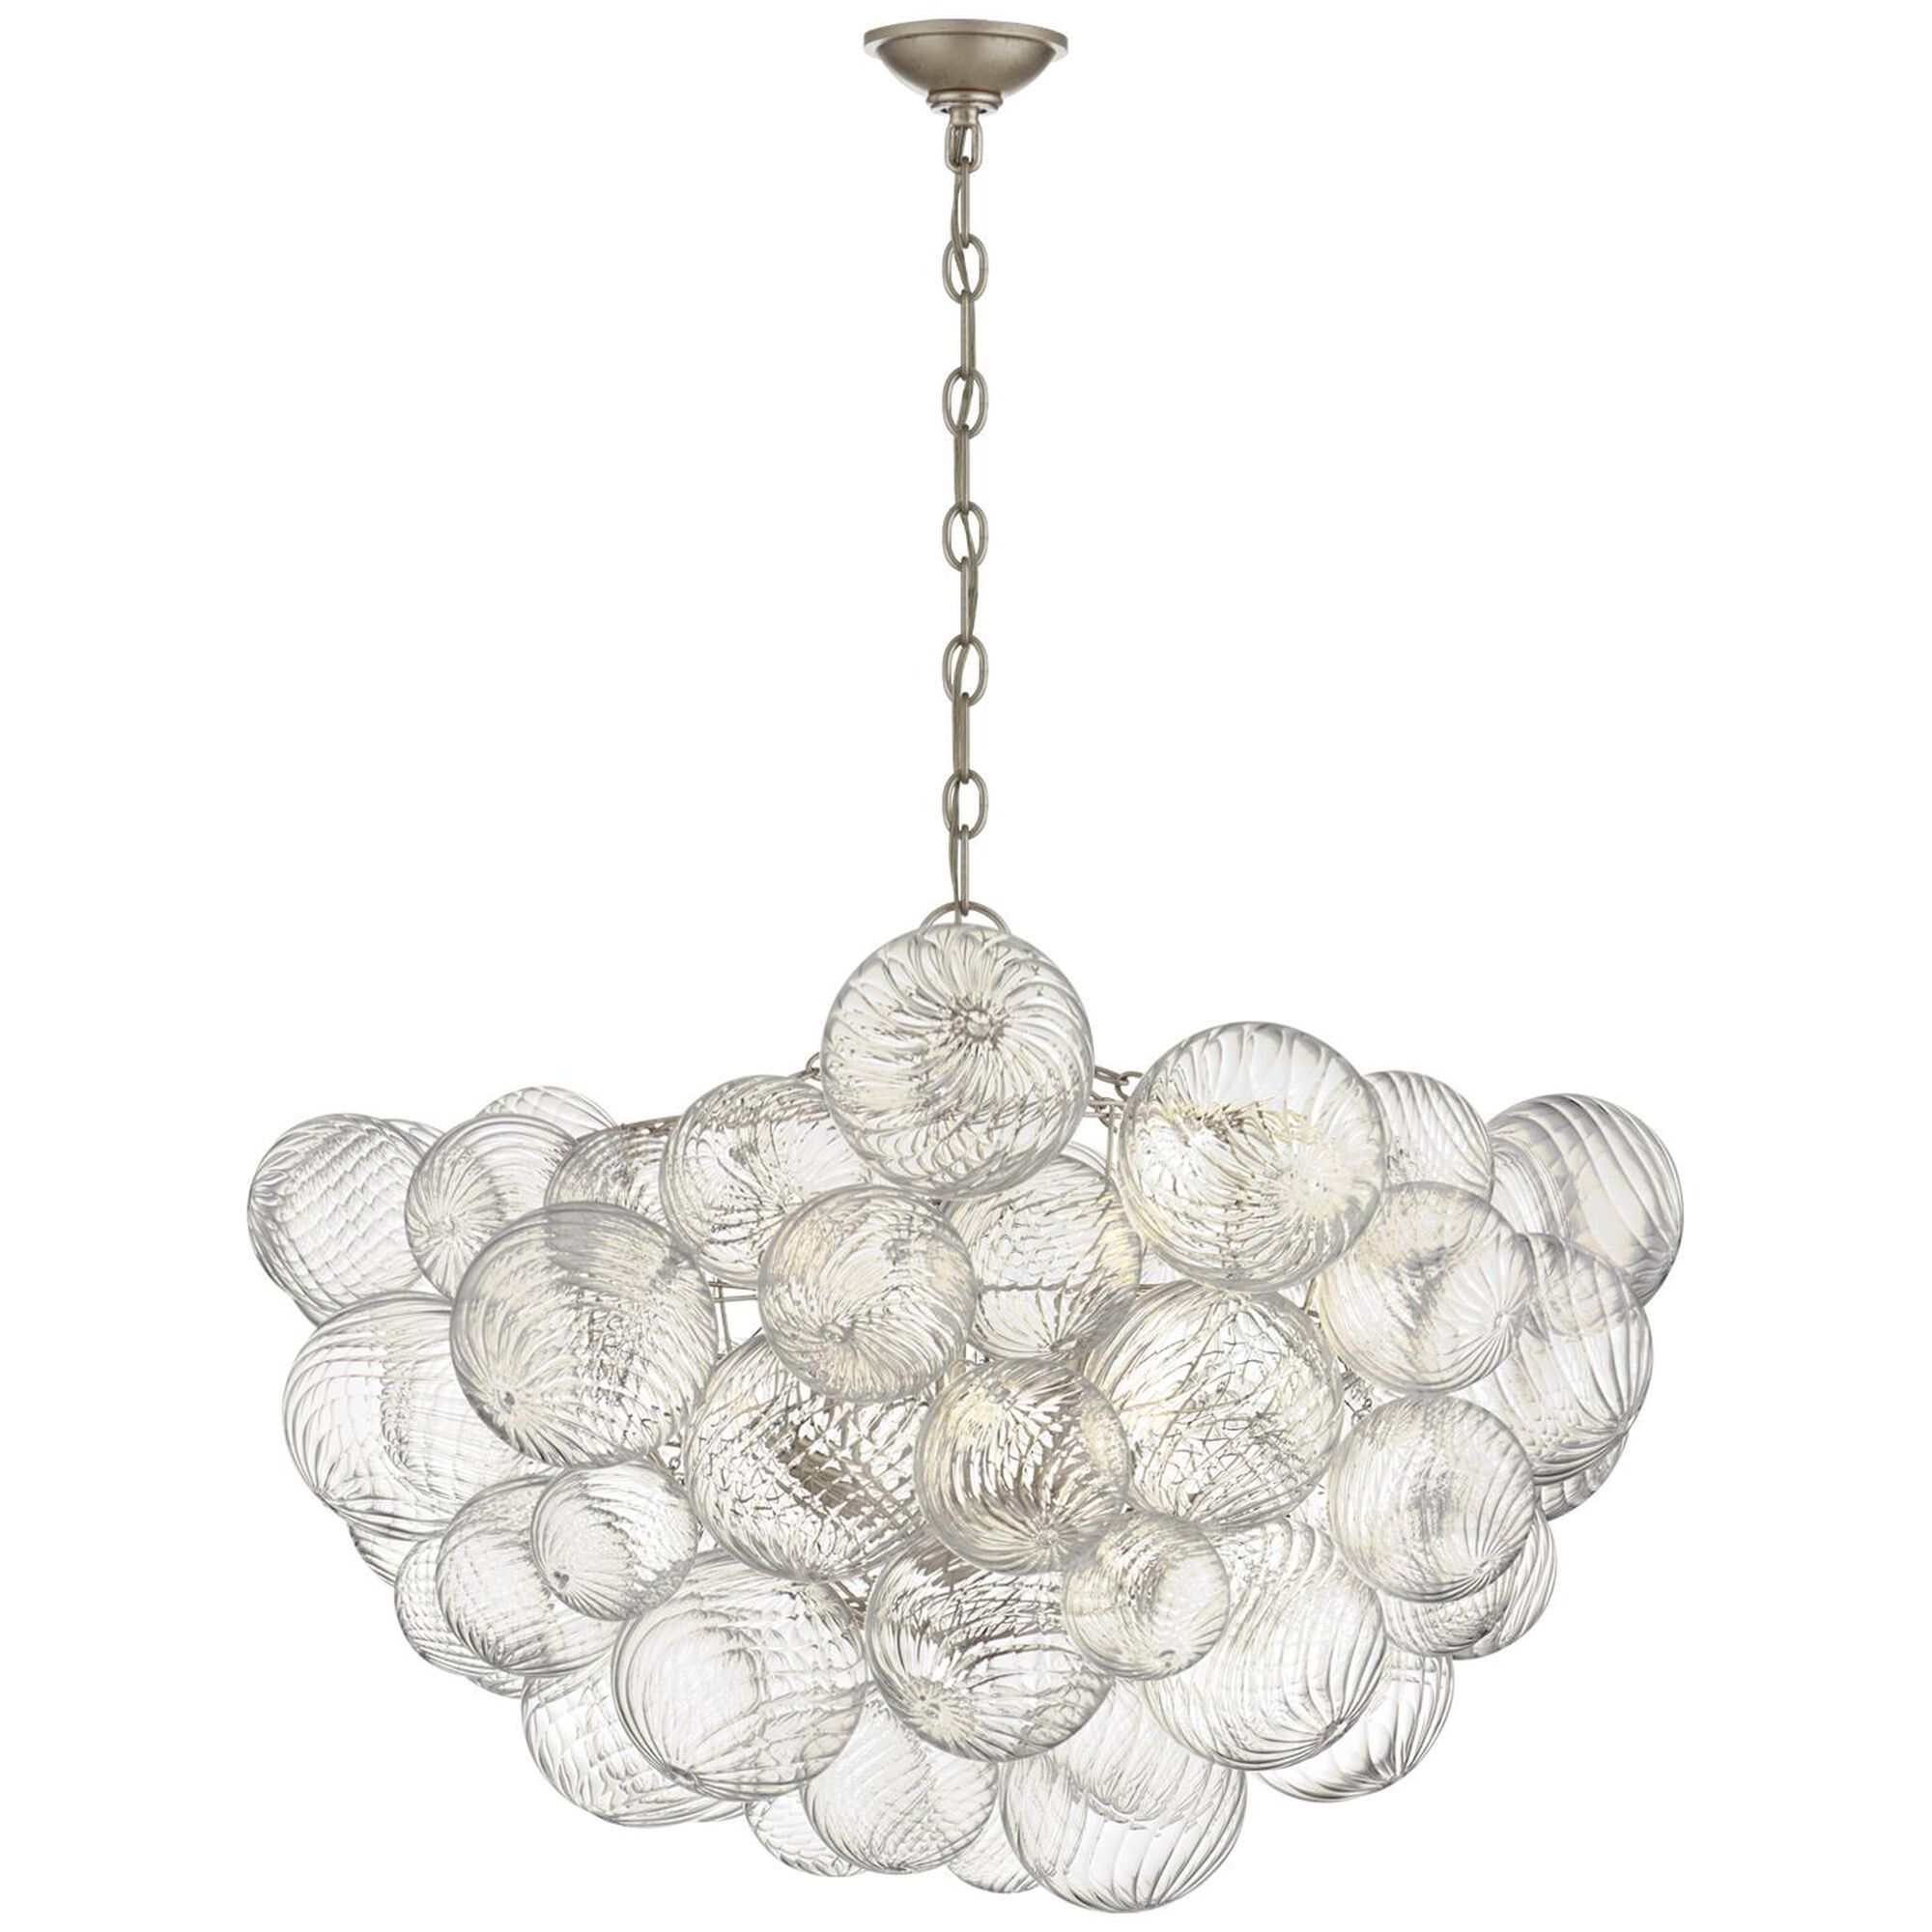 Julie Neill Talia 33 Inch 8 Light Chandelier by Visual Comfort Signature Collection | 1800 Lighting